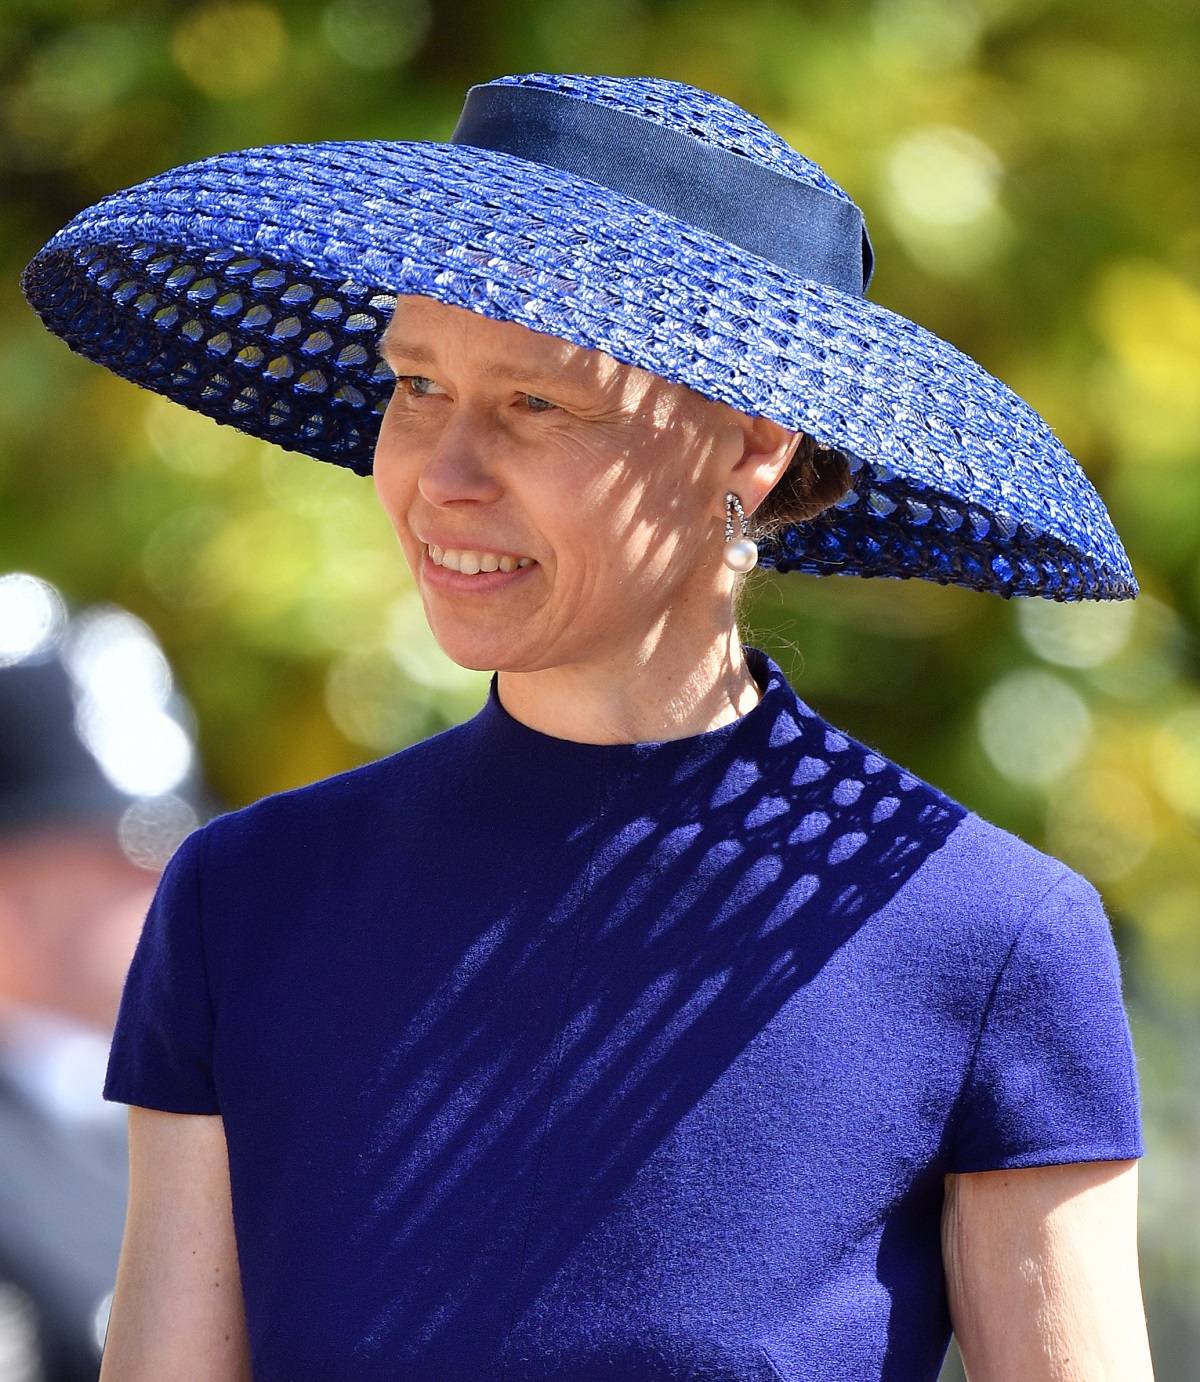 Sarah Chatto (Fot. Pool/Max Mumby, Getty Images)